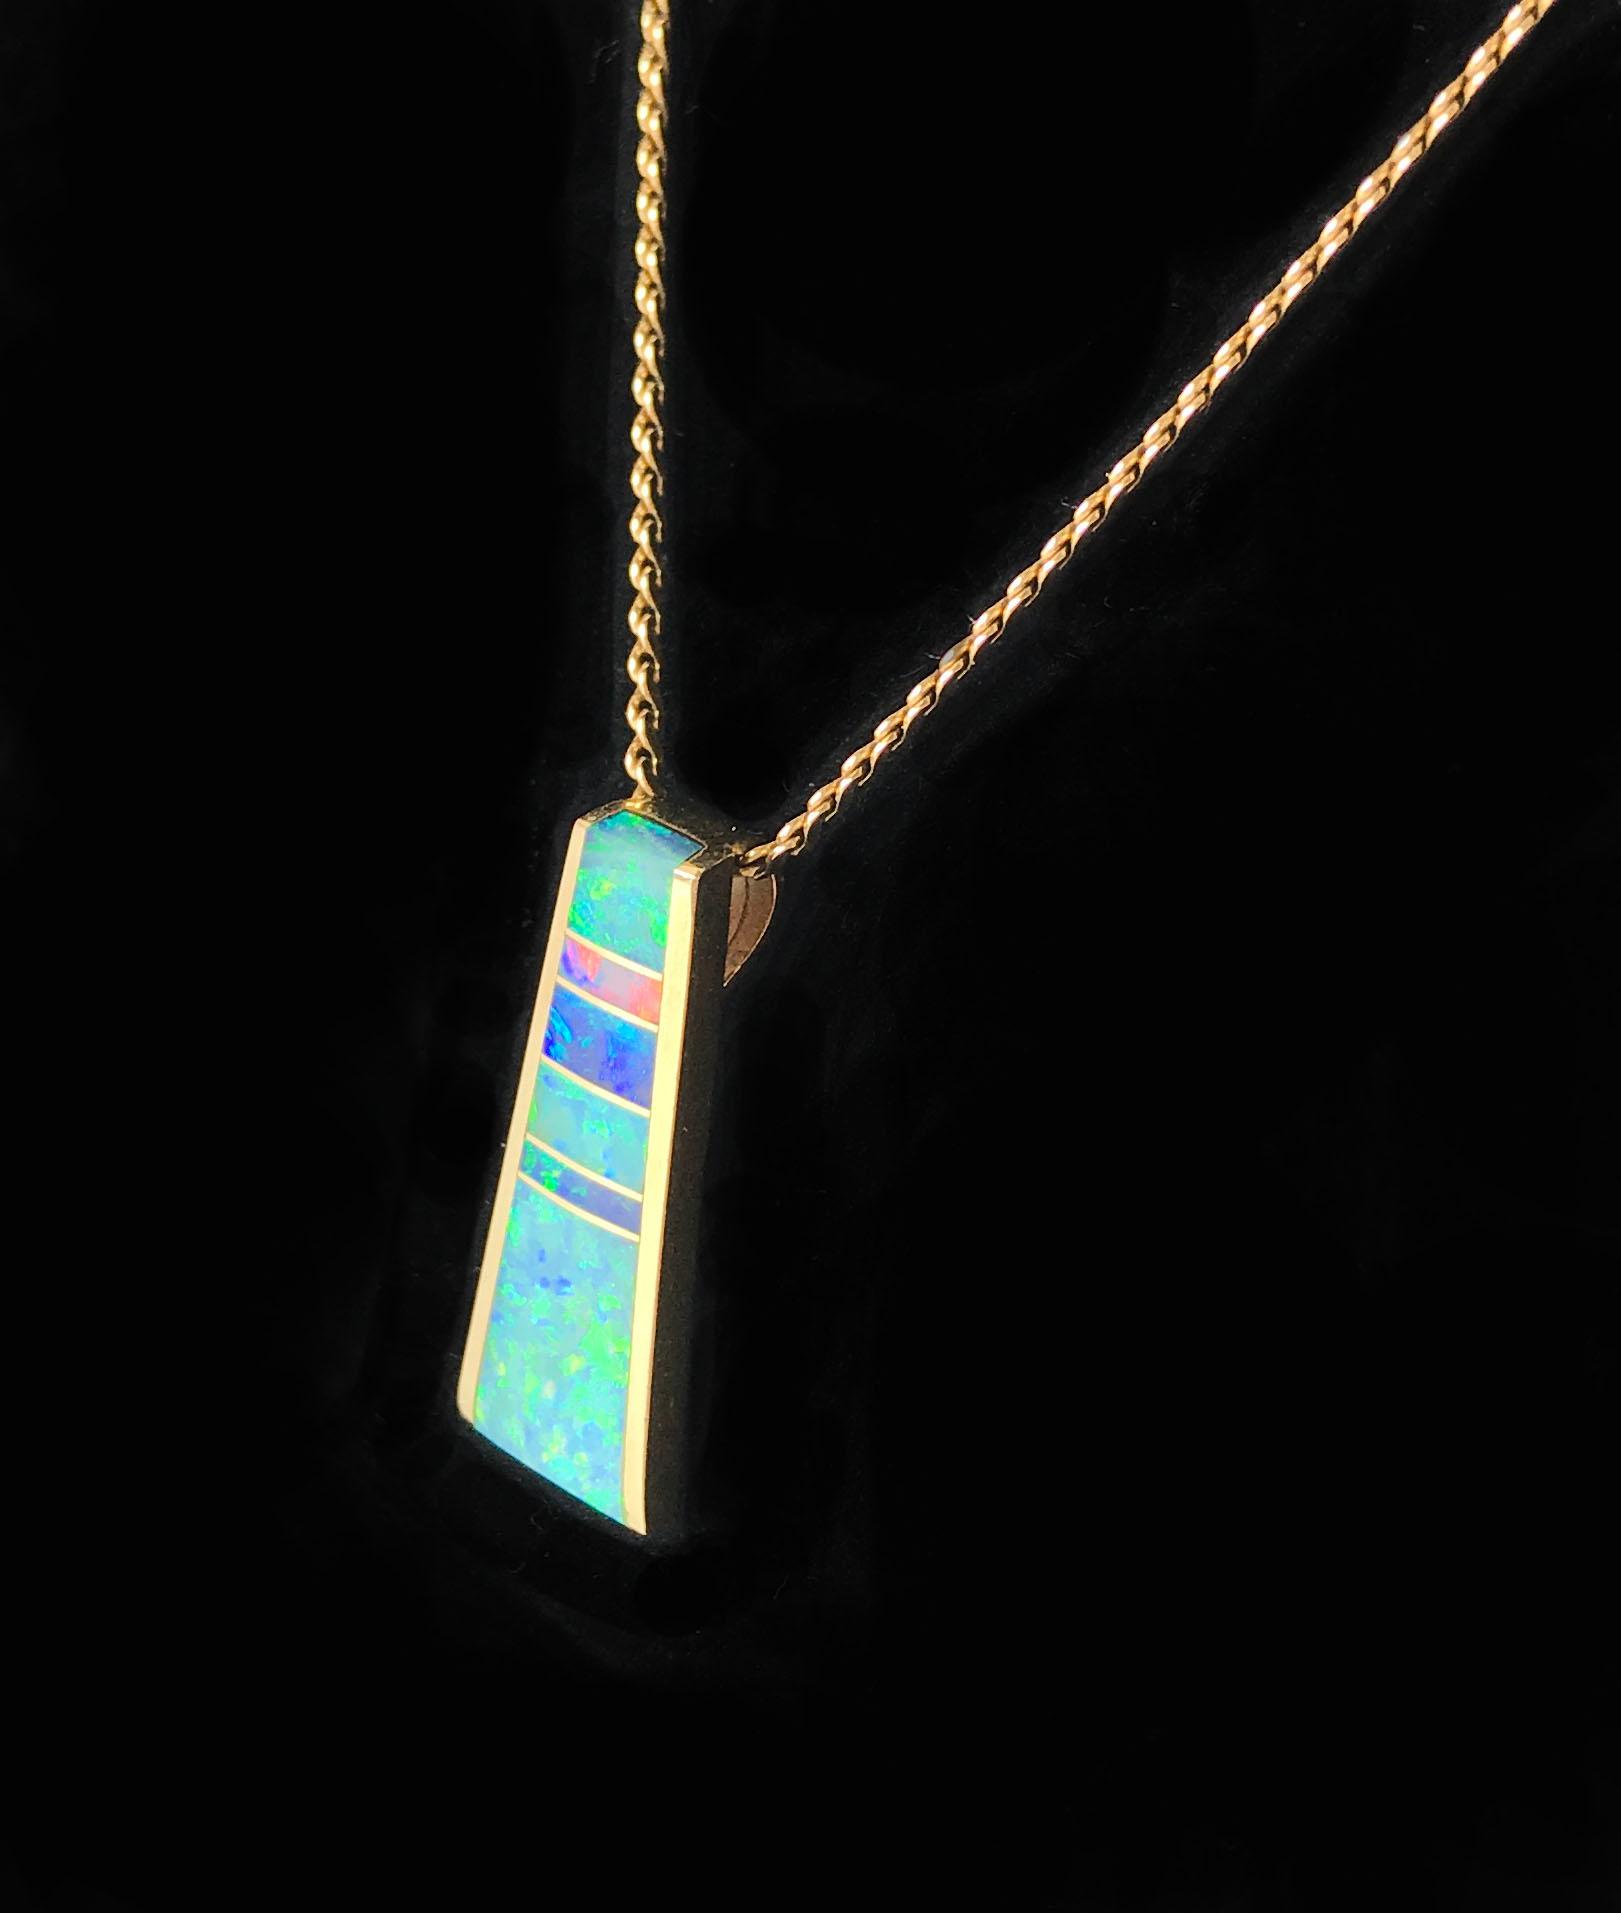 14KT Yellow Gold Opal Pendant with 10KT Yellow Gold Chain Necklace